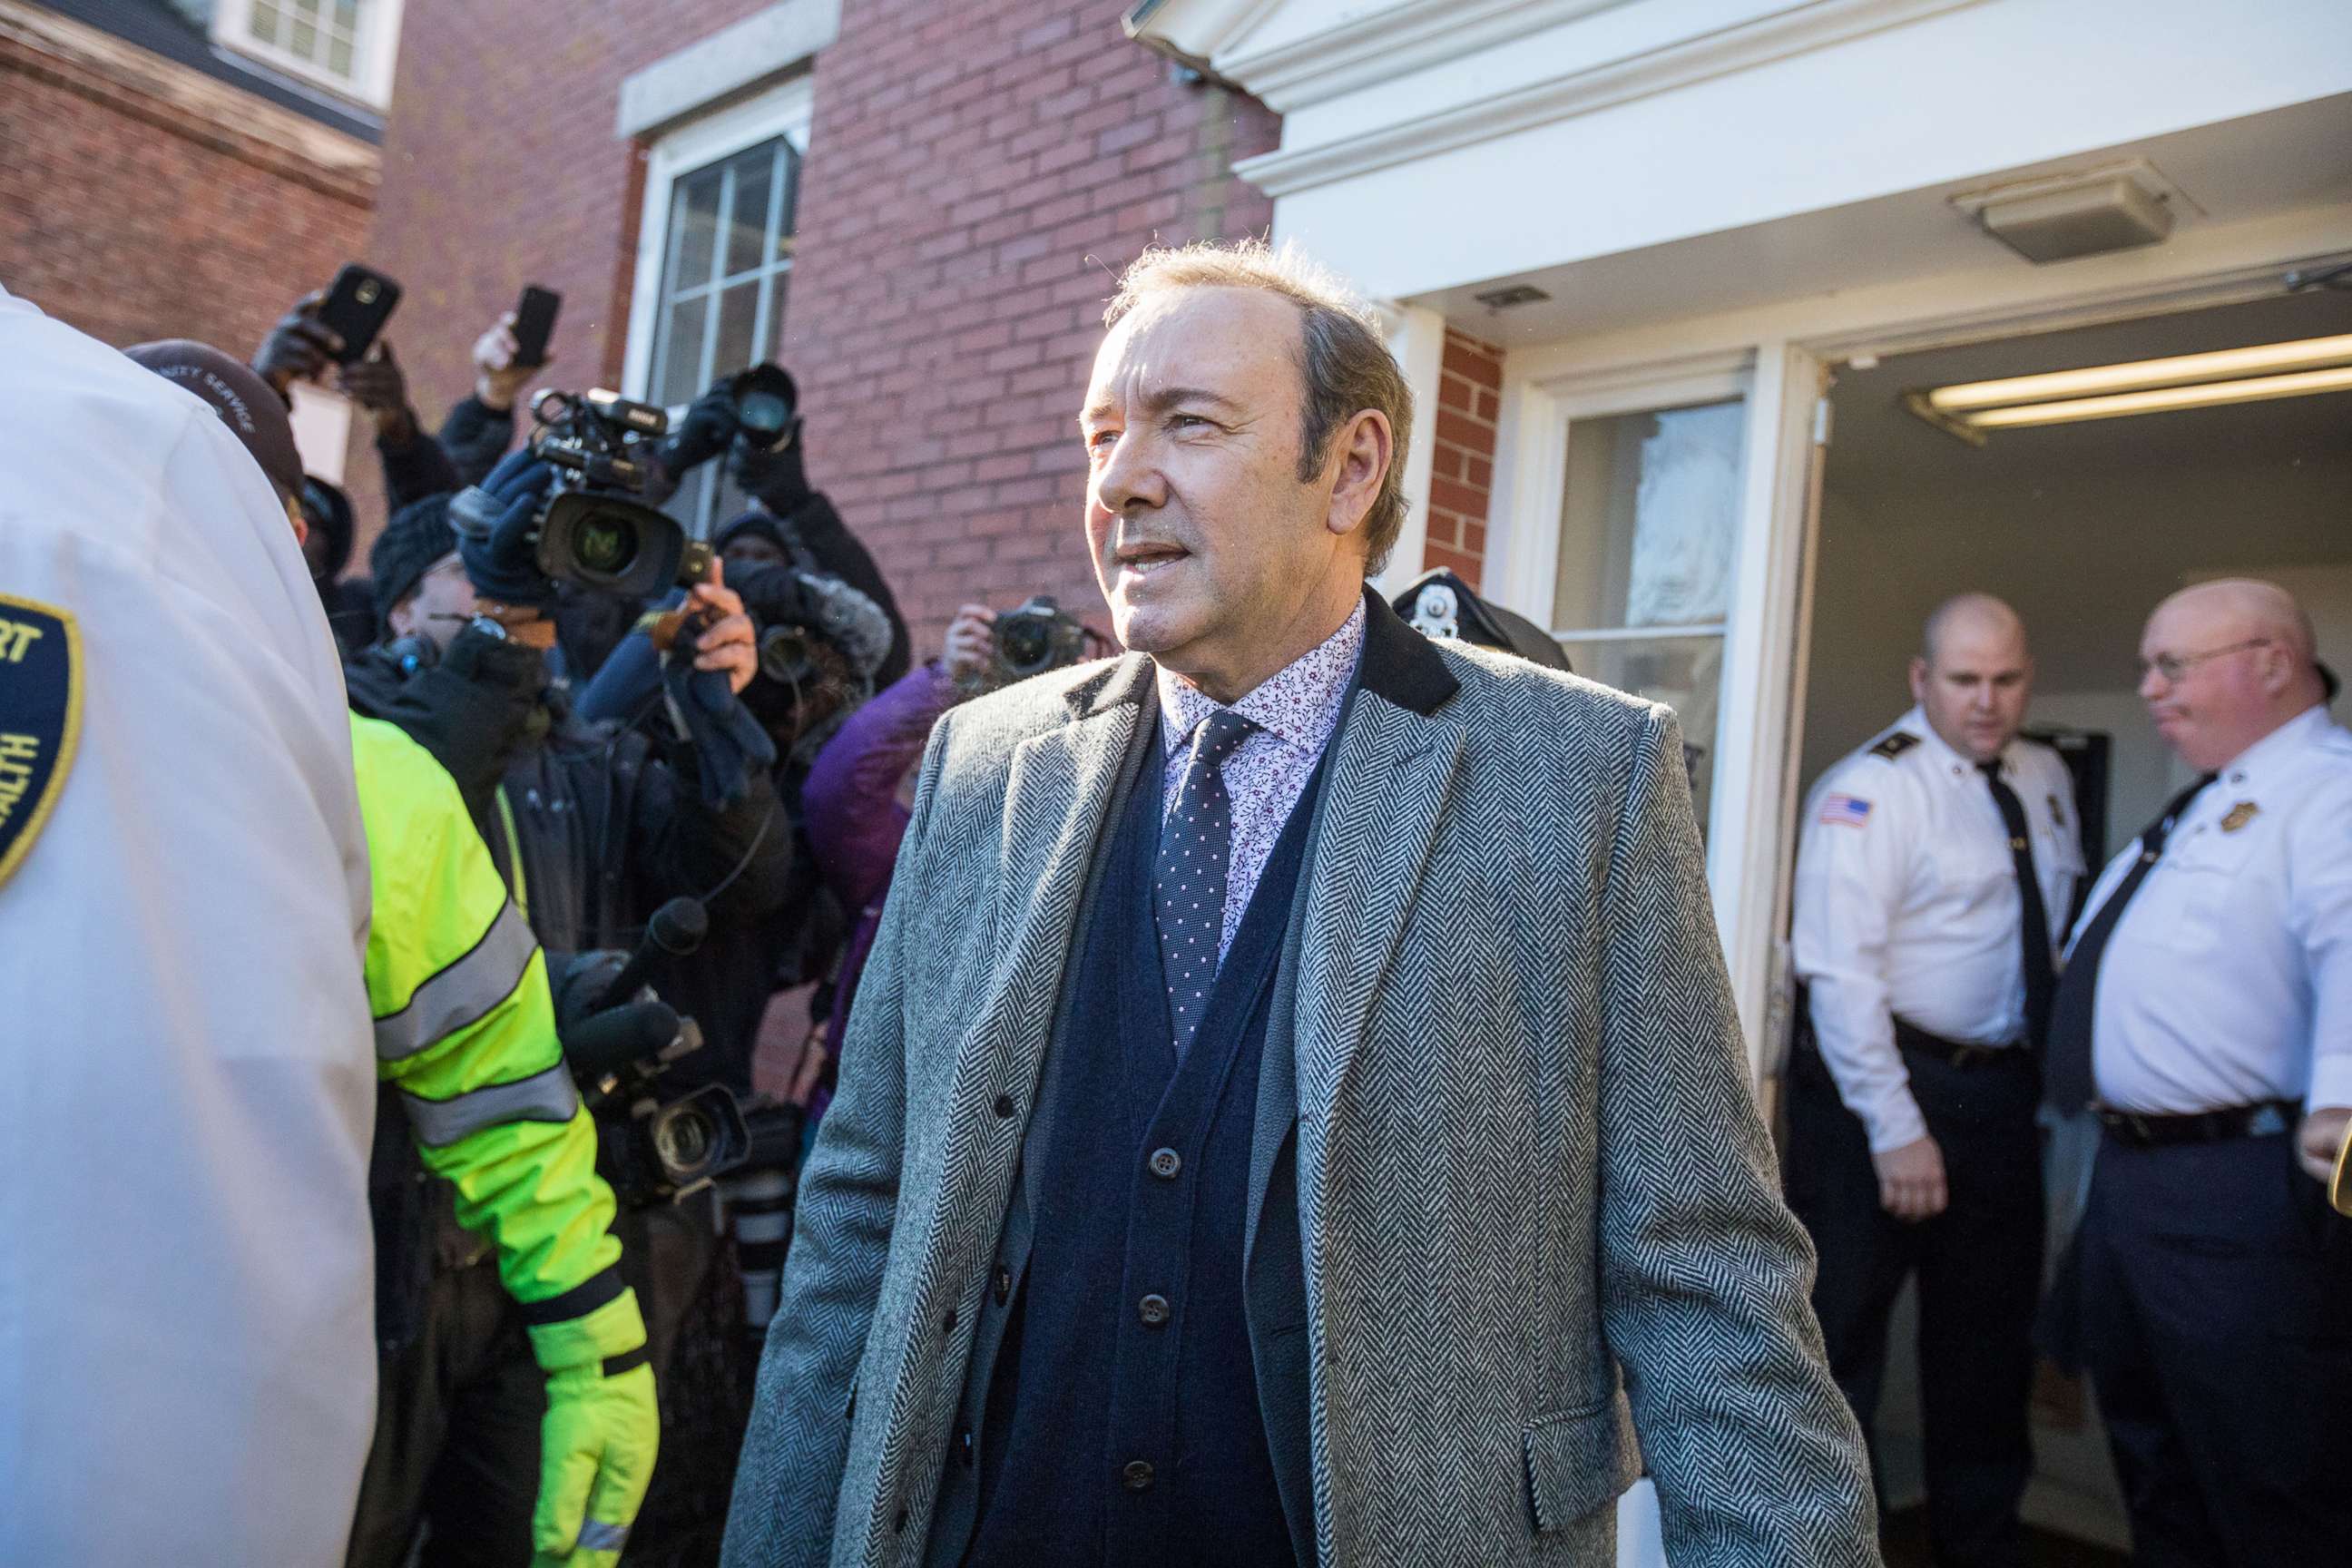 PHOTO: Actor Kevin Spacey leaves Nantucket District Court after being arraigned on sexual assault charges, Jan. 7, 2019, in Nantucket, Mass.